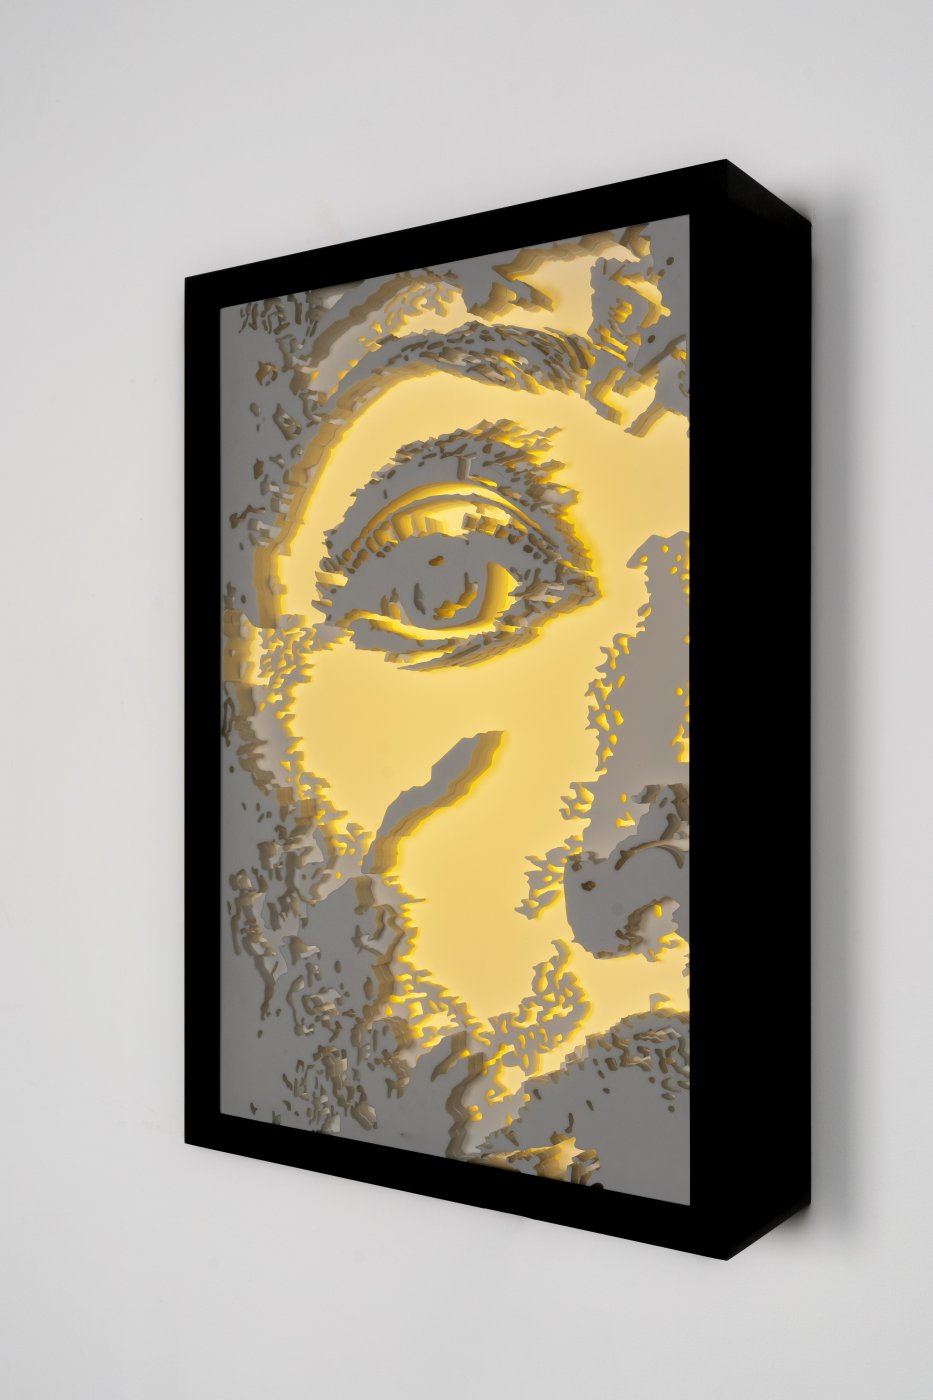 Alexandre Farto aka Vhils, Glimmer series #02, 2022. Water jet cut Corian, assembled by hand, led lights. 79,5 x 53,5 x 17 cm. Unique
